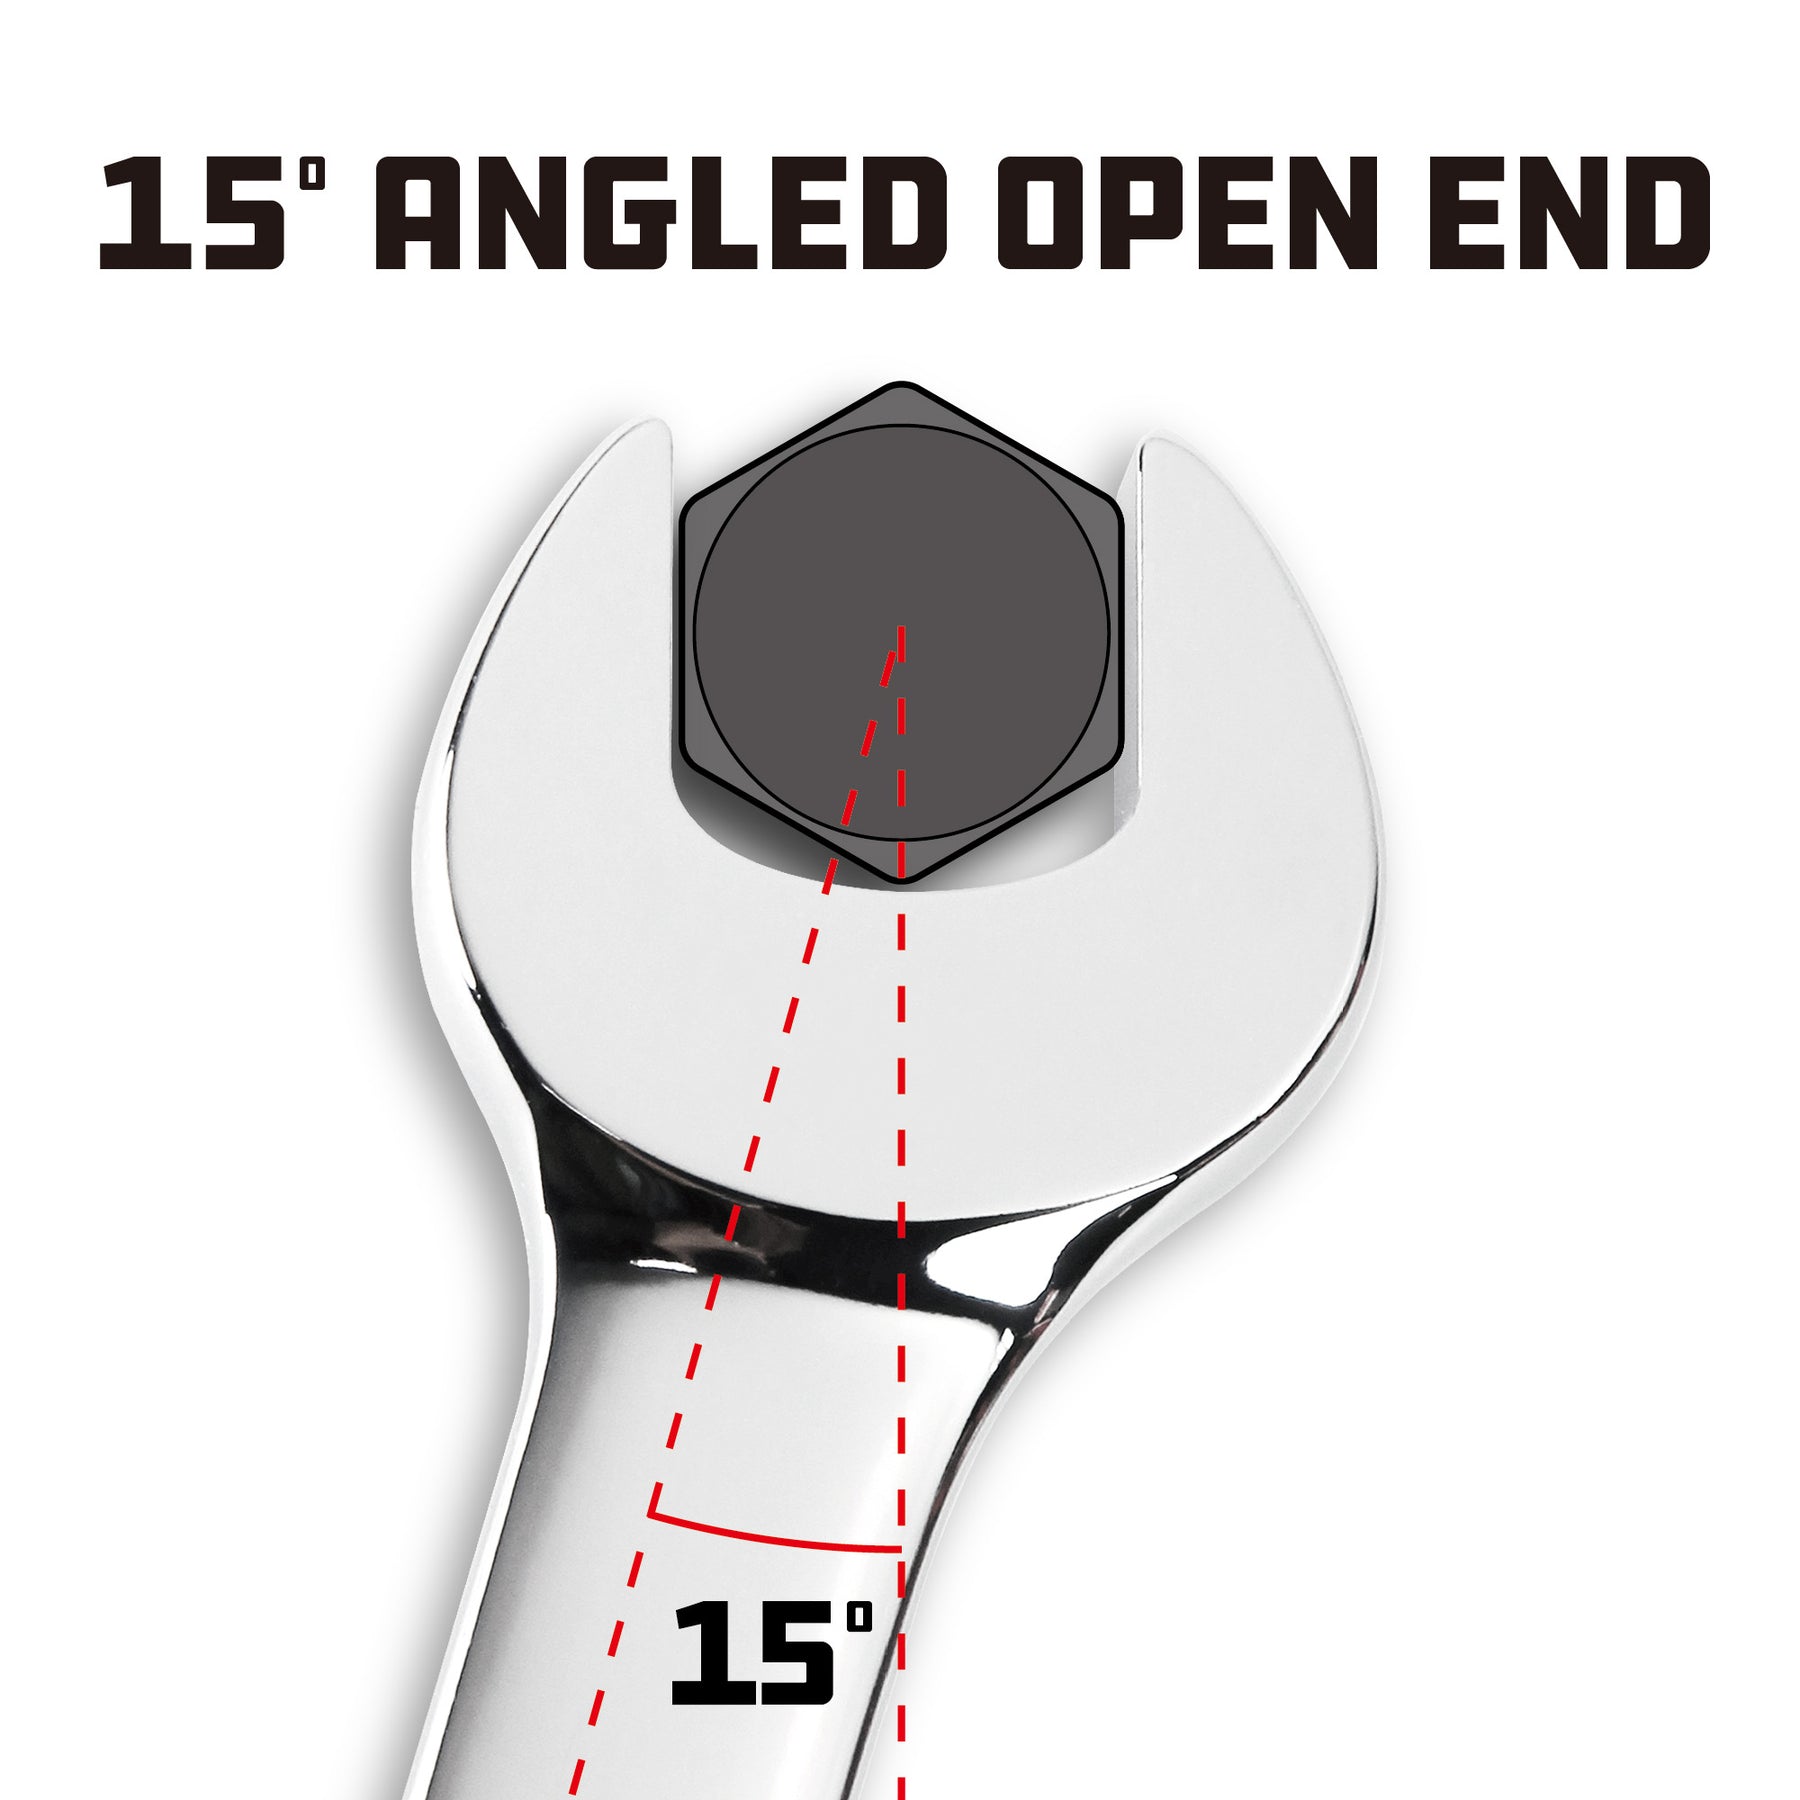 32 MM Fully Polished Metric Combination Wrench